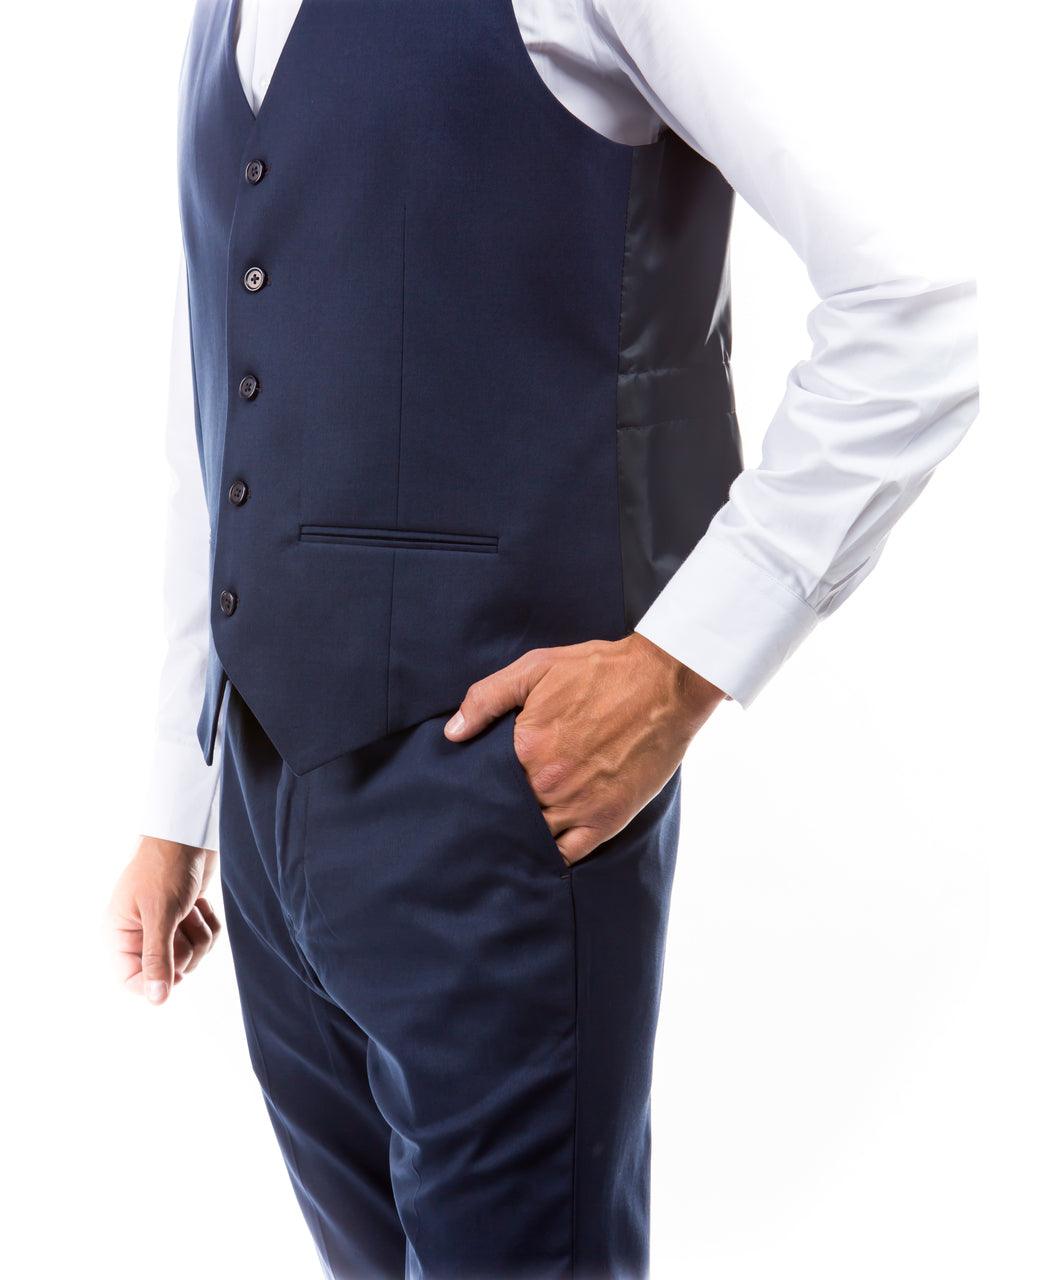 A picture of A Vest colored Deep Ocean Blue from the Suits & Separates Collection By Zegarie (brand).